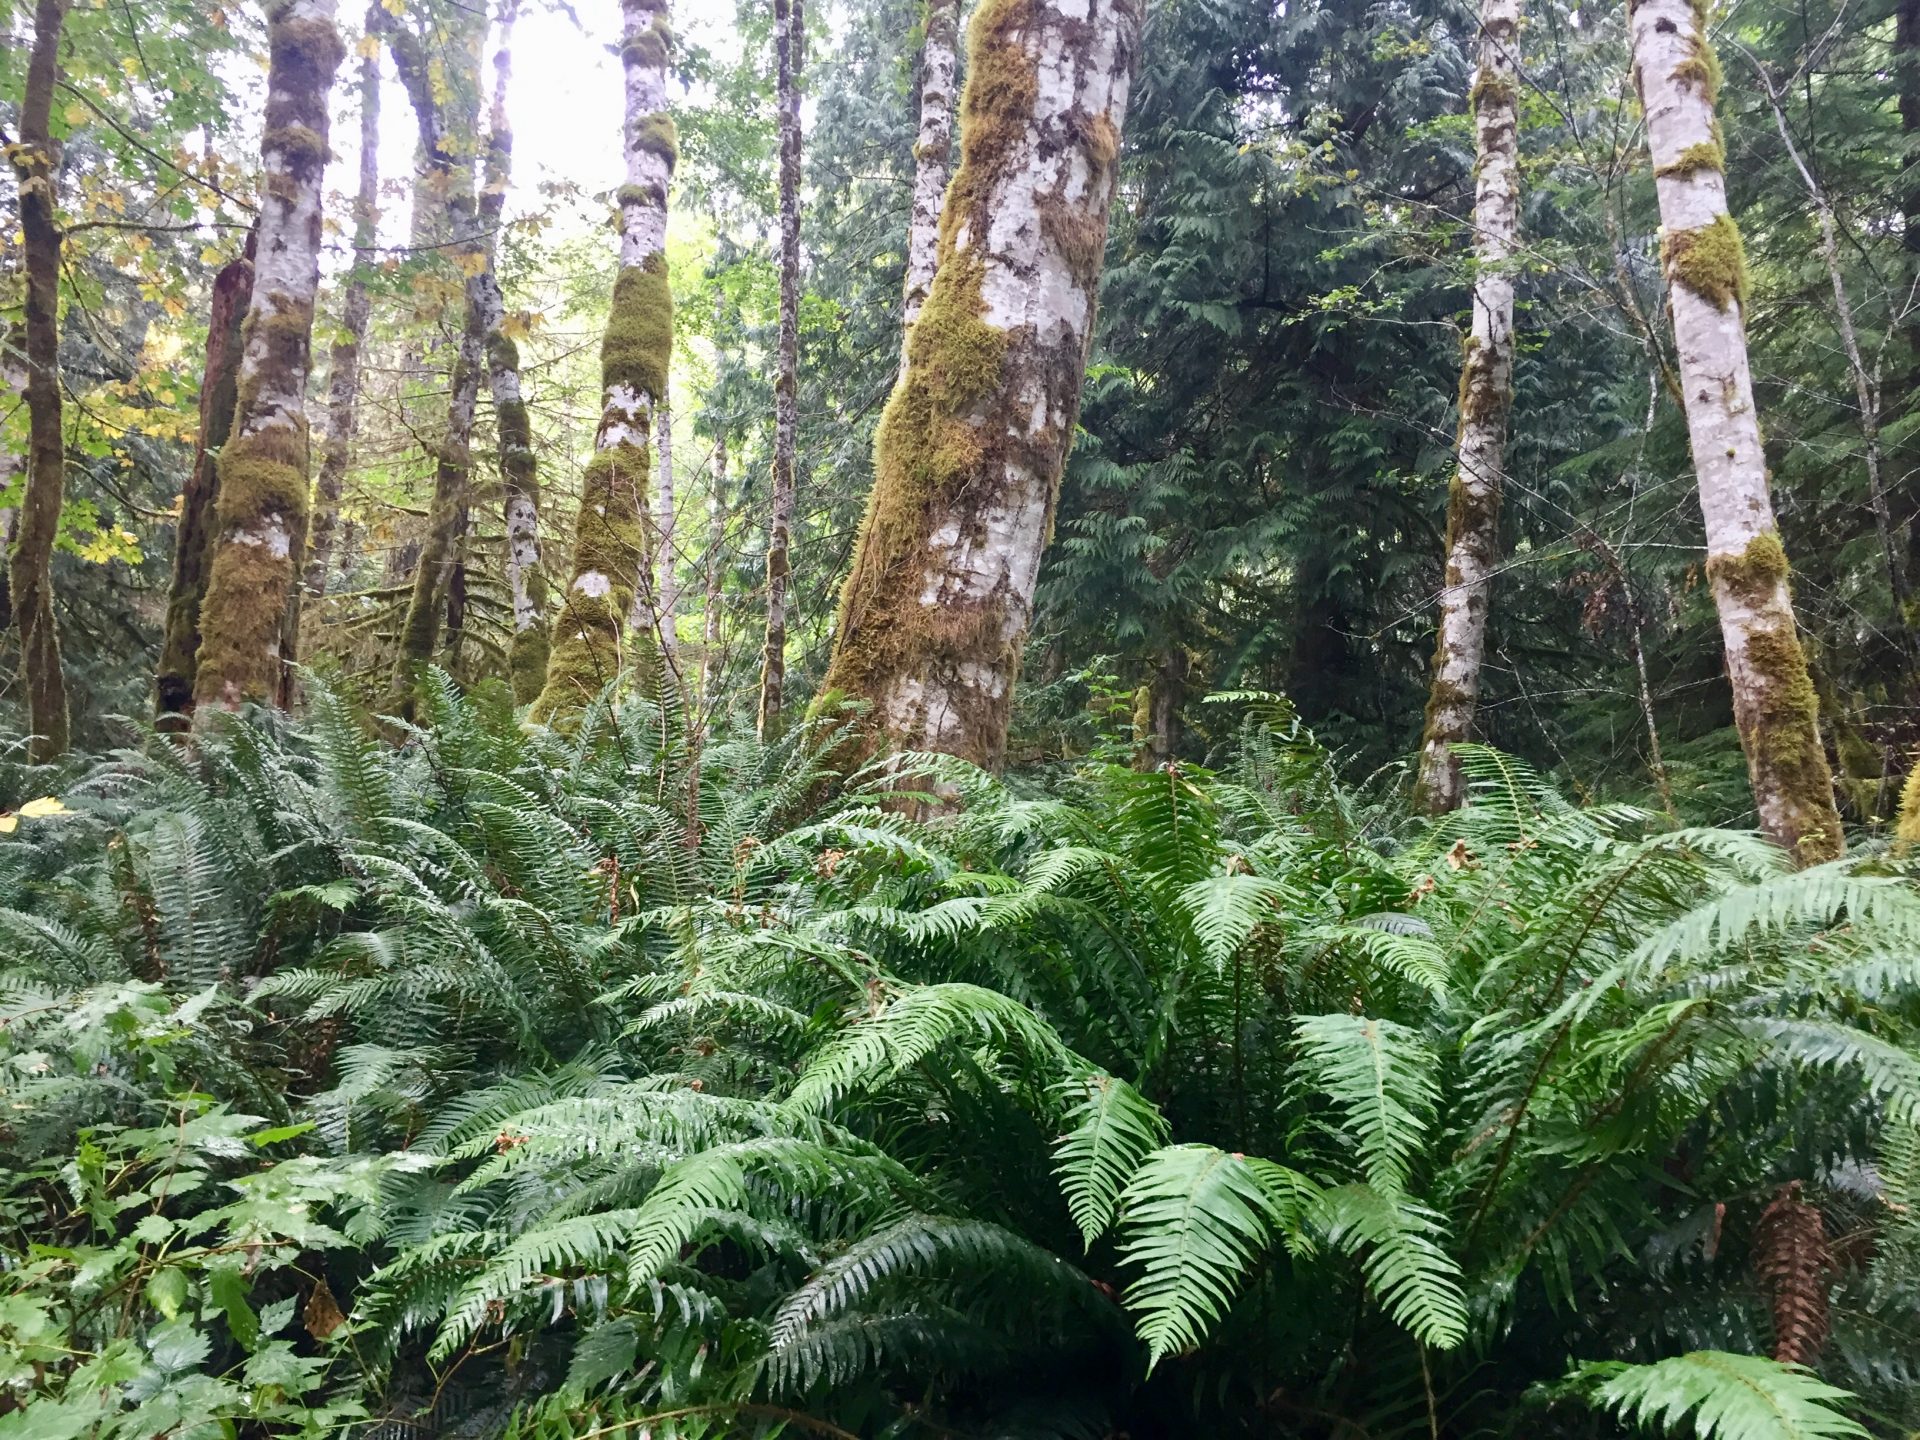 Vancouver Island Part 1 (Sept 24 to 29)